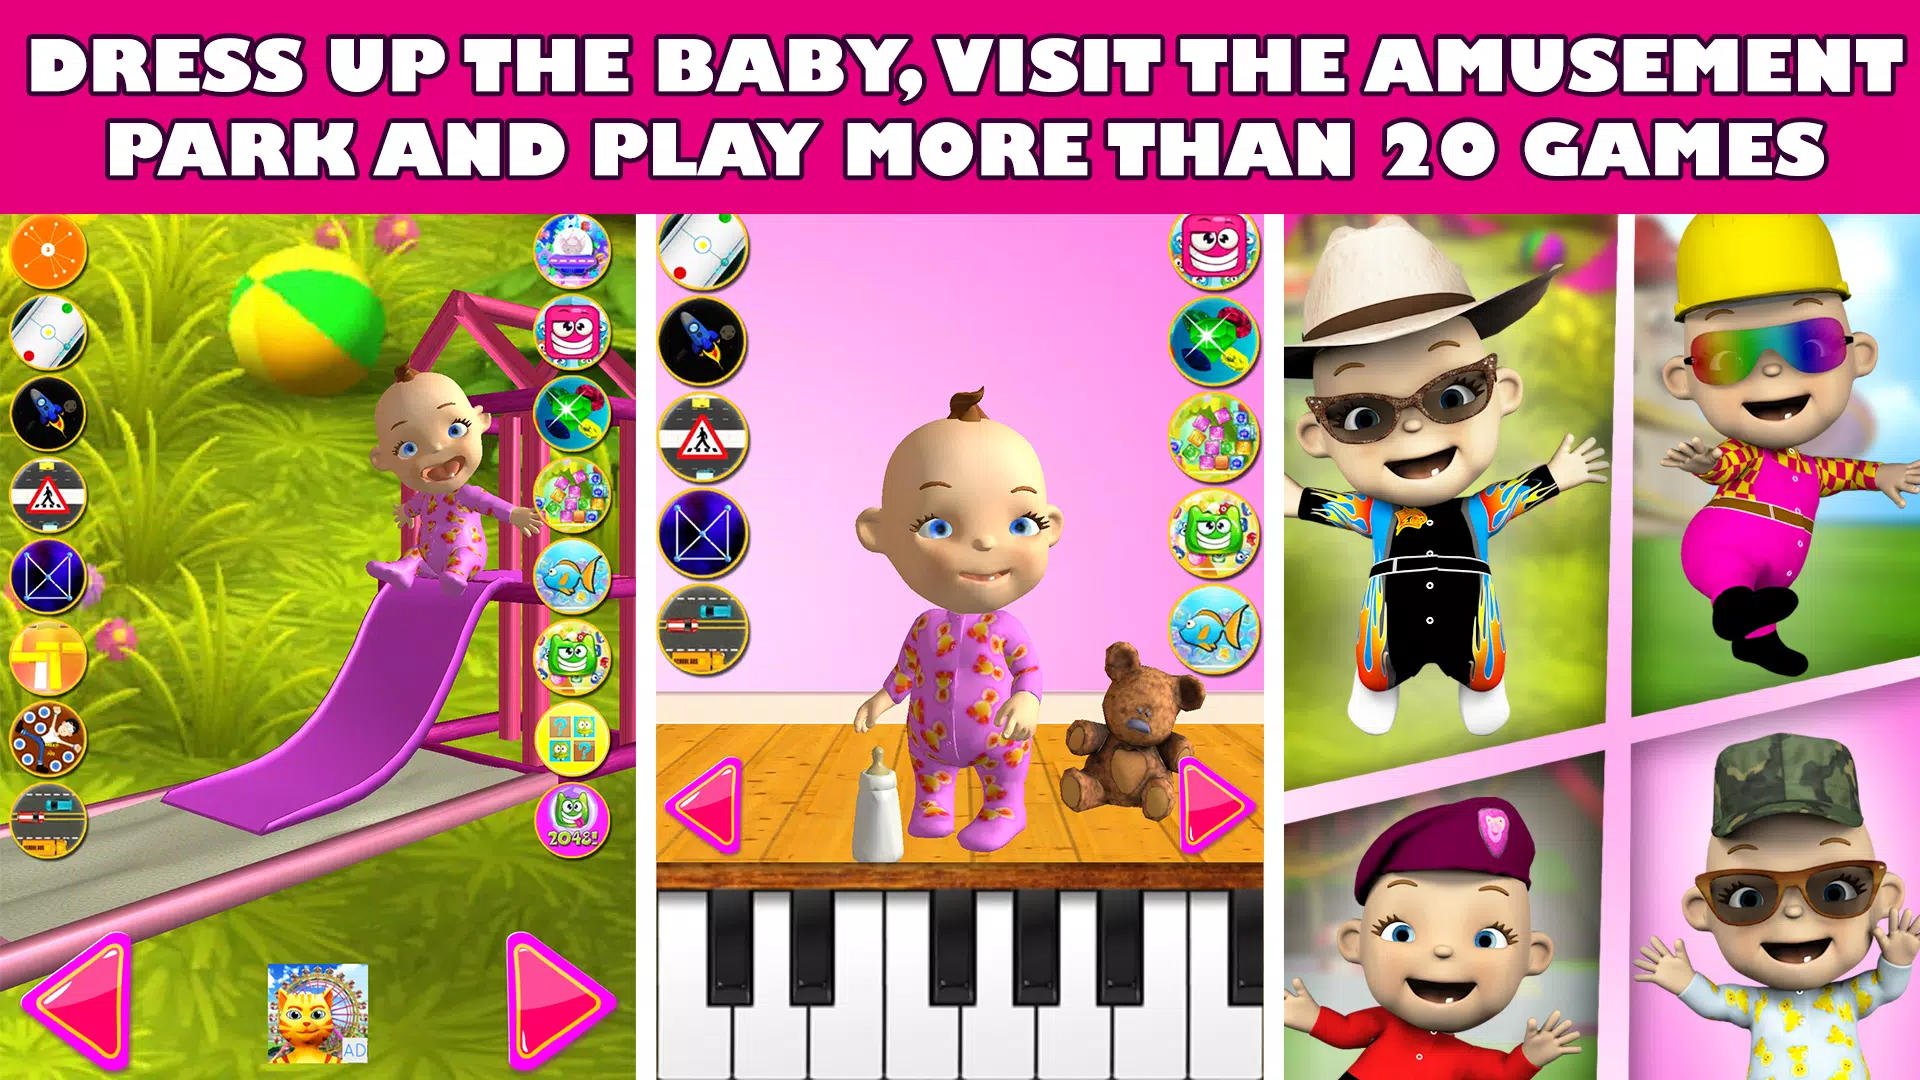 Baby Games Ad